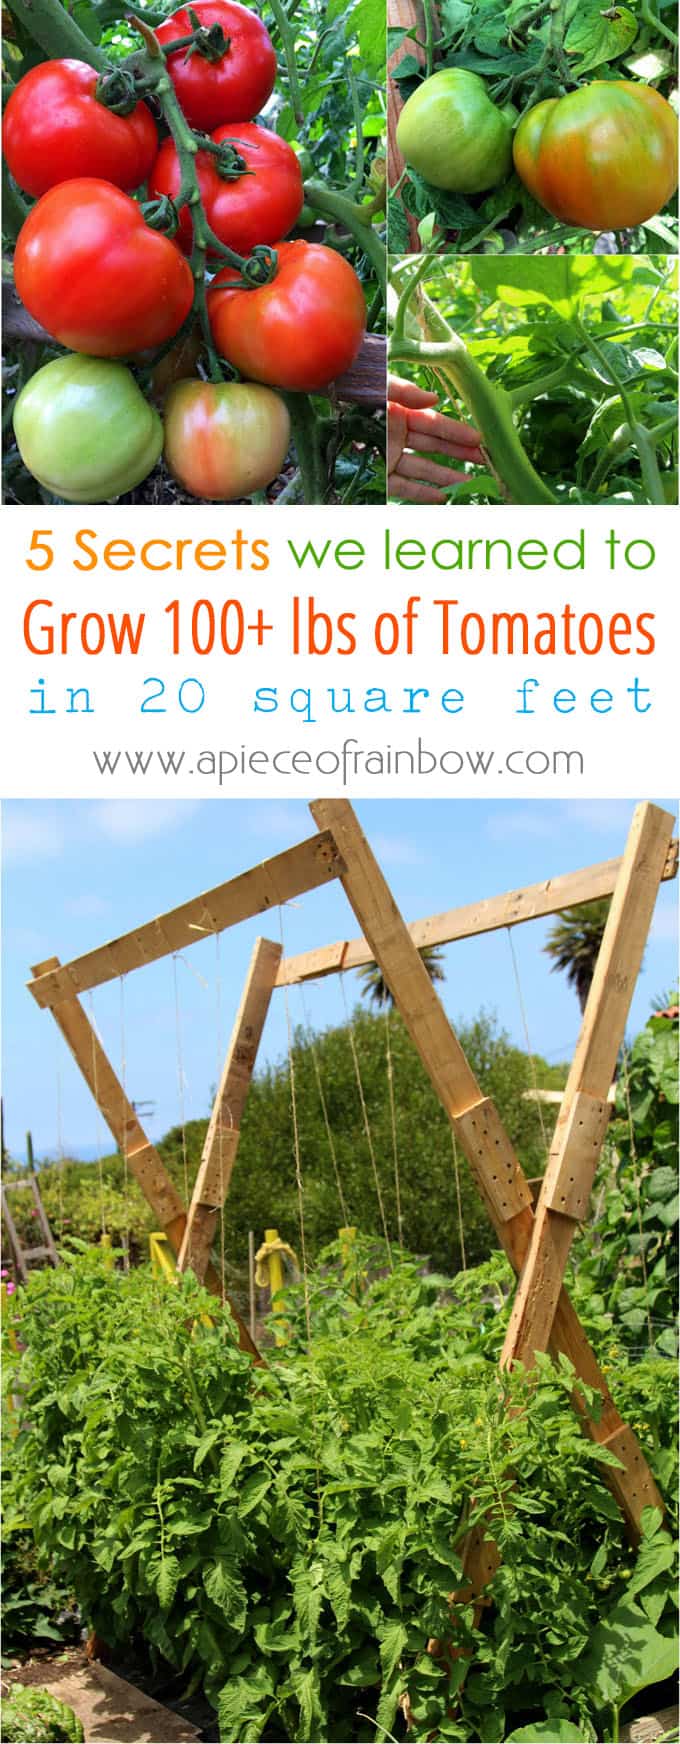 5 tried-and-true techniques we learned on how to grow tomatoes like an expert and get a big harvest: over 100 lbs in 20 square feet! - A Piece Of Rainbow